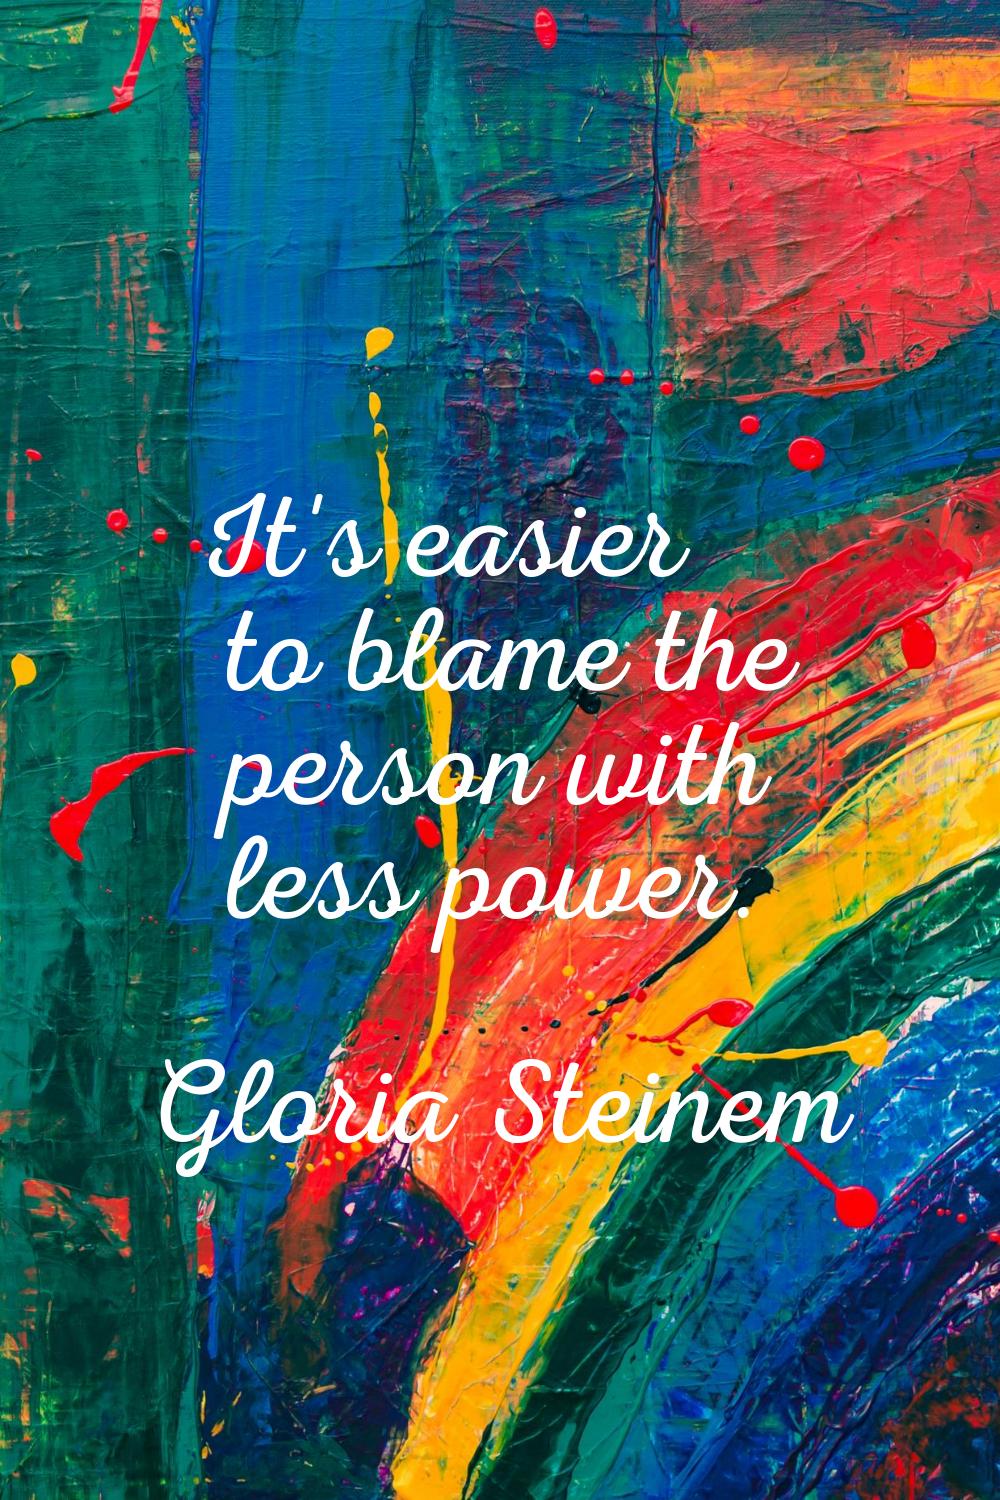 It's easier to blame the person with less power.